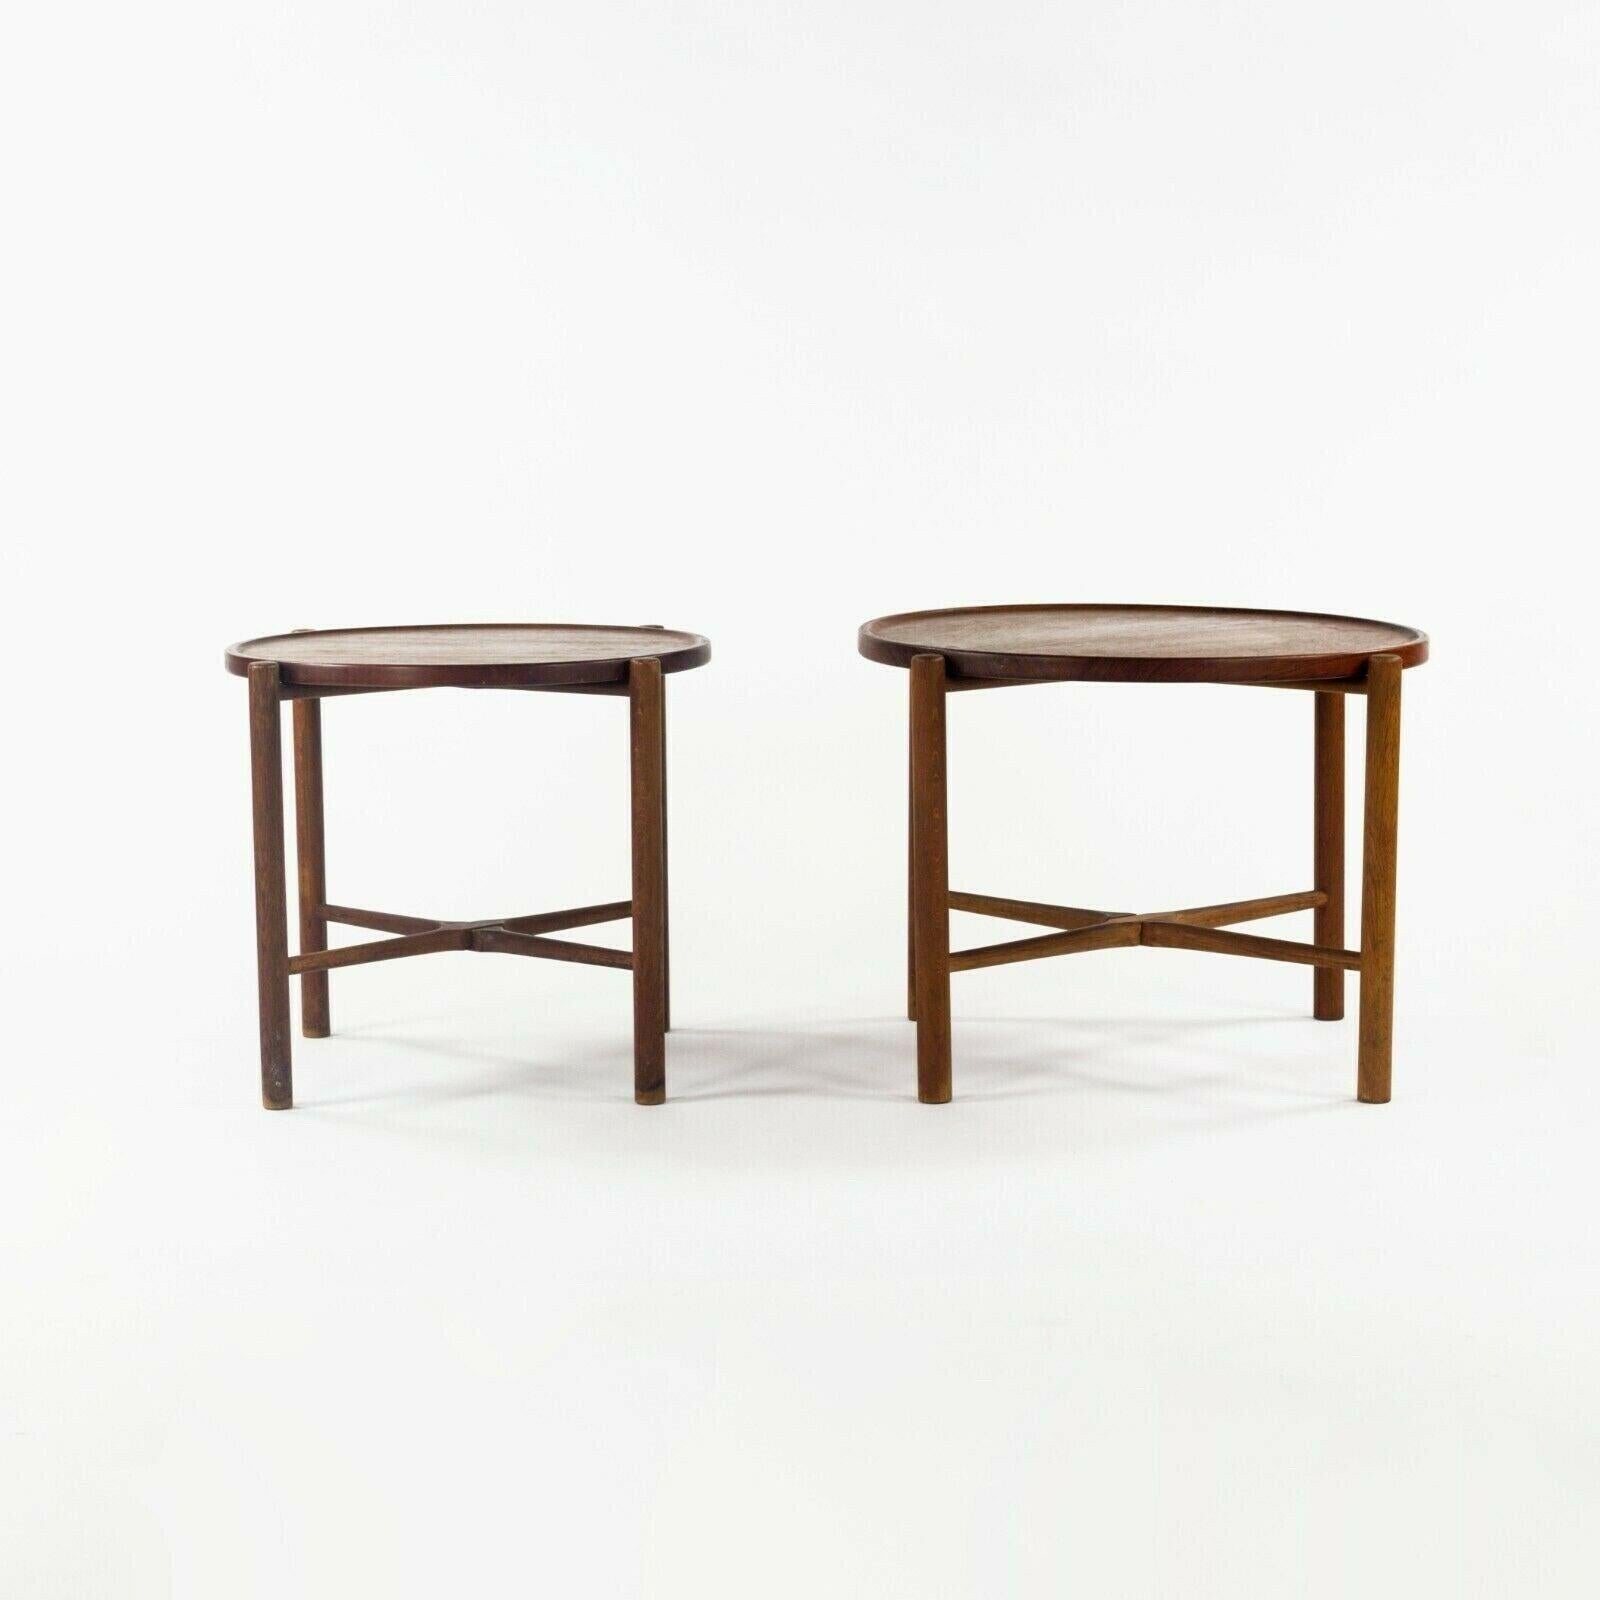 Listed for sale is a single (two tables are available as shown, but the price listed is for each table) PP35 folding side table, designed by Hans Wegner and produced by Andreas Tuck circa 1960. Both tables came from a Washington, DC area estate,